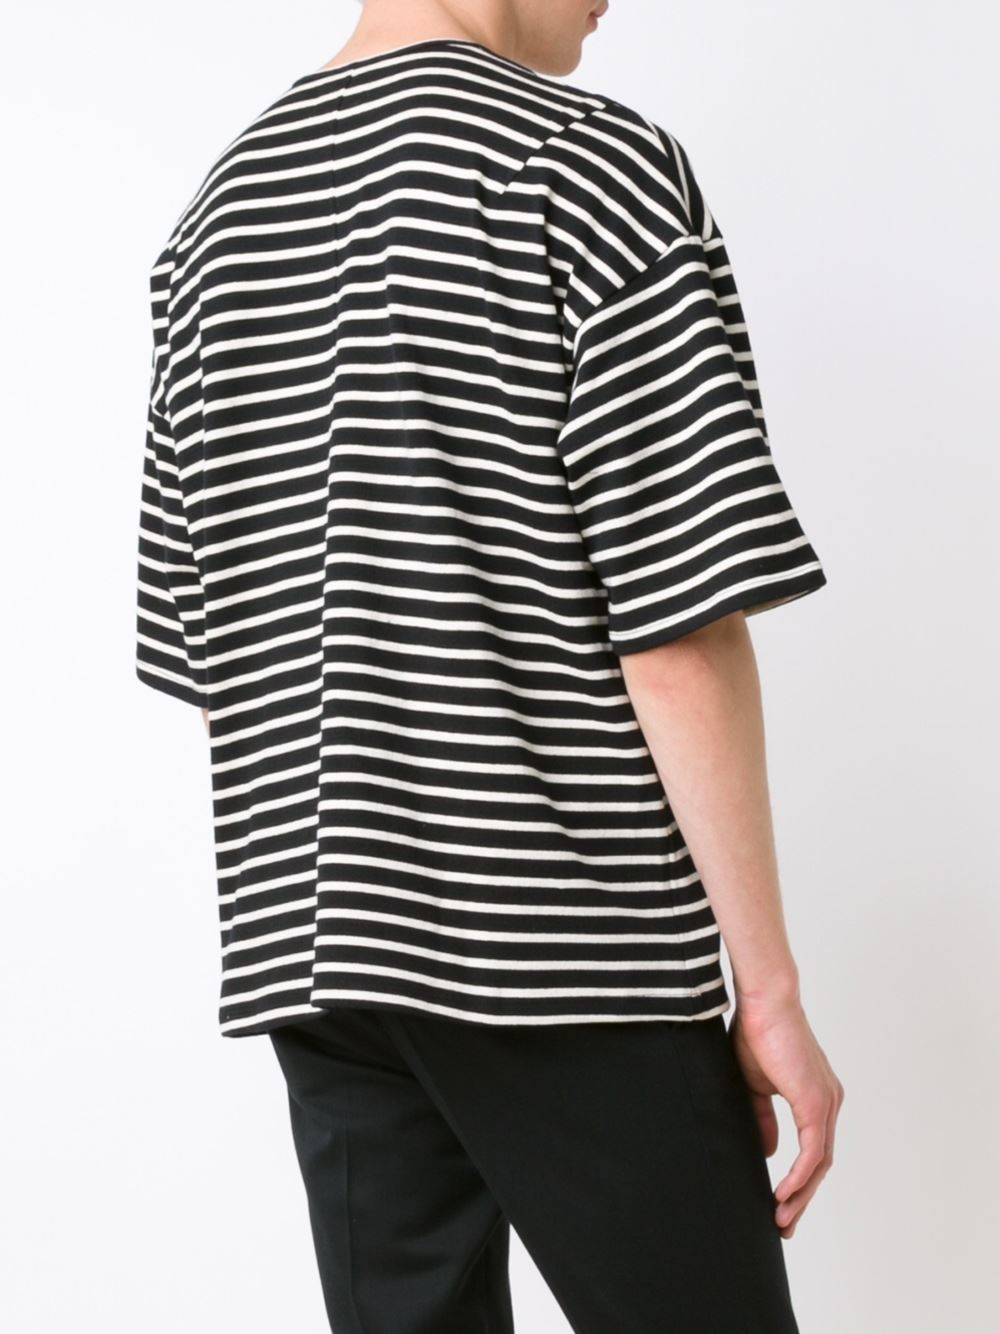 Lyst - Fear Of God 4th Collection Striped T-shirt in Black for Men